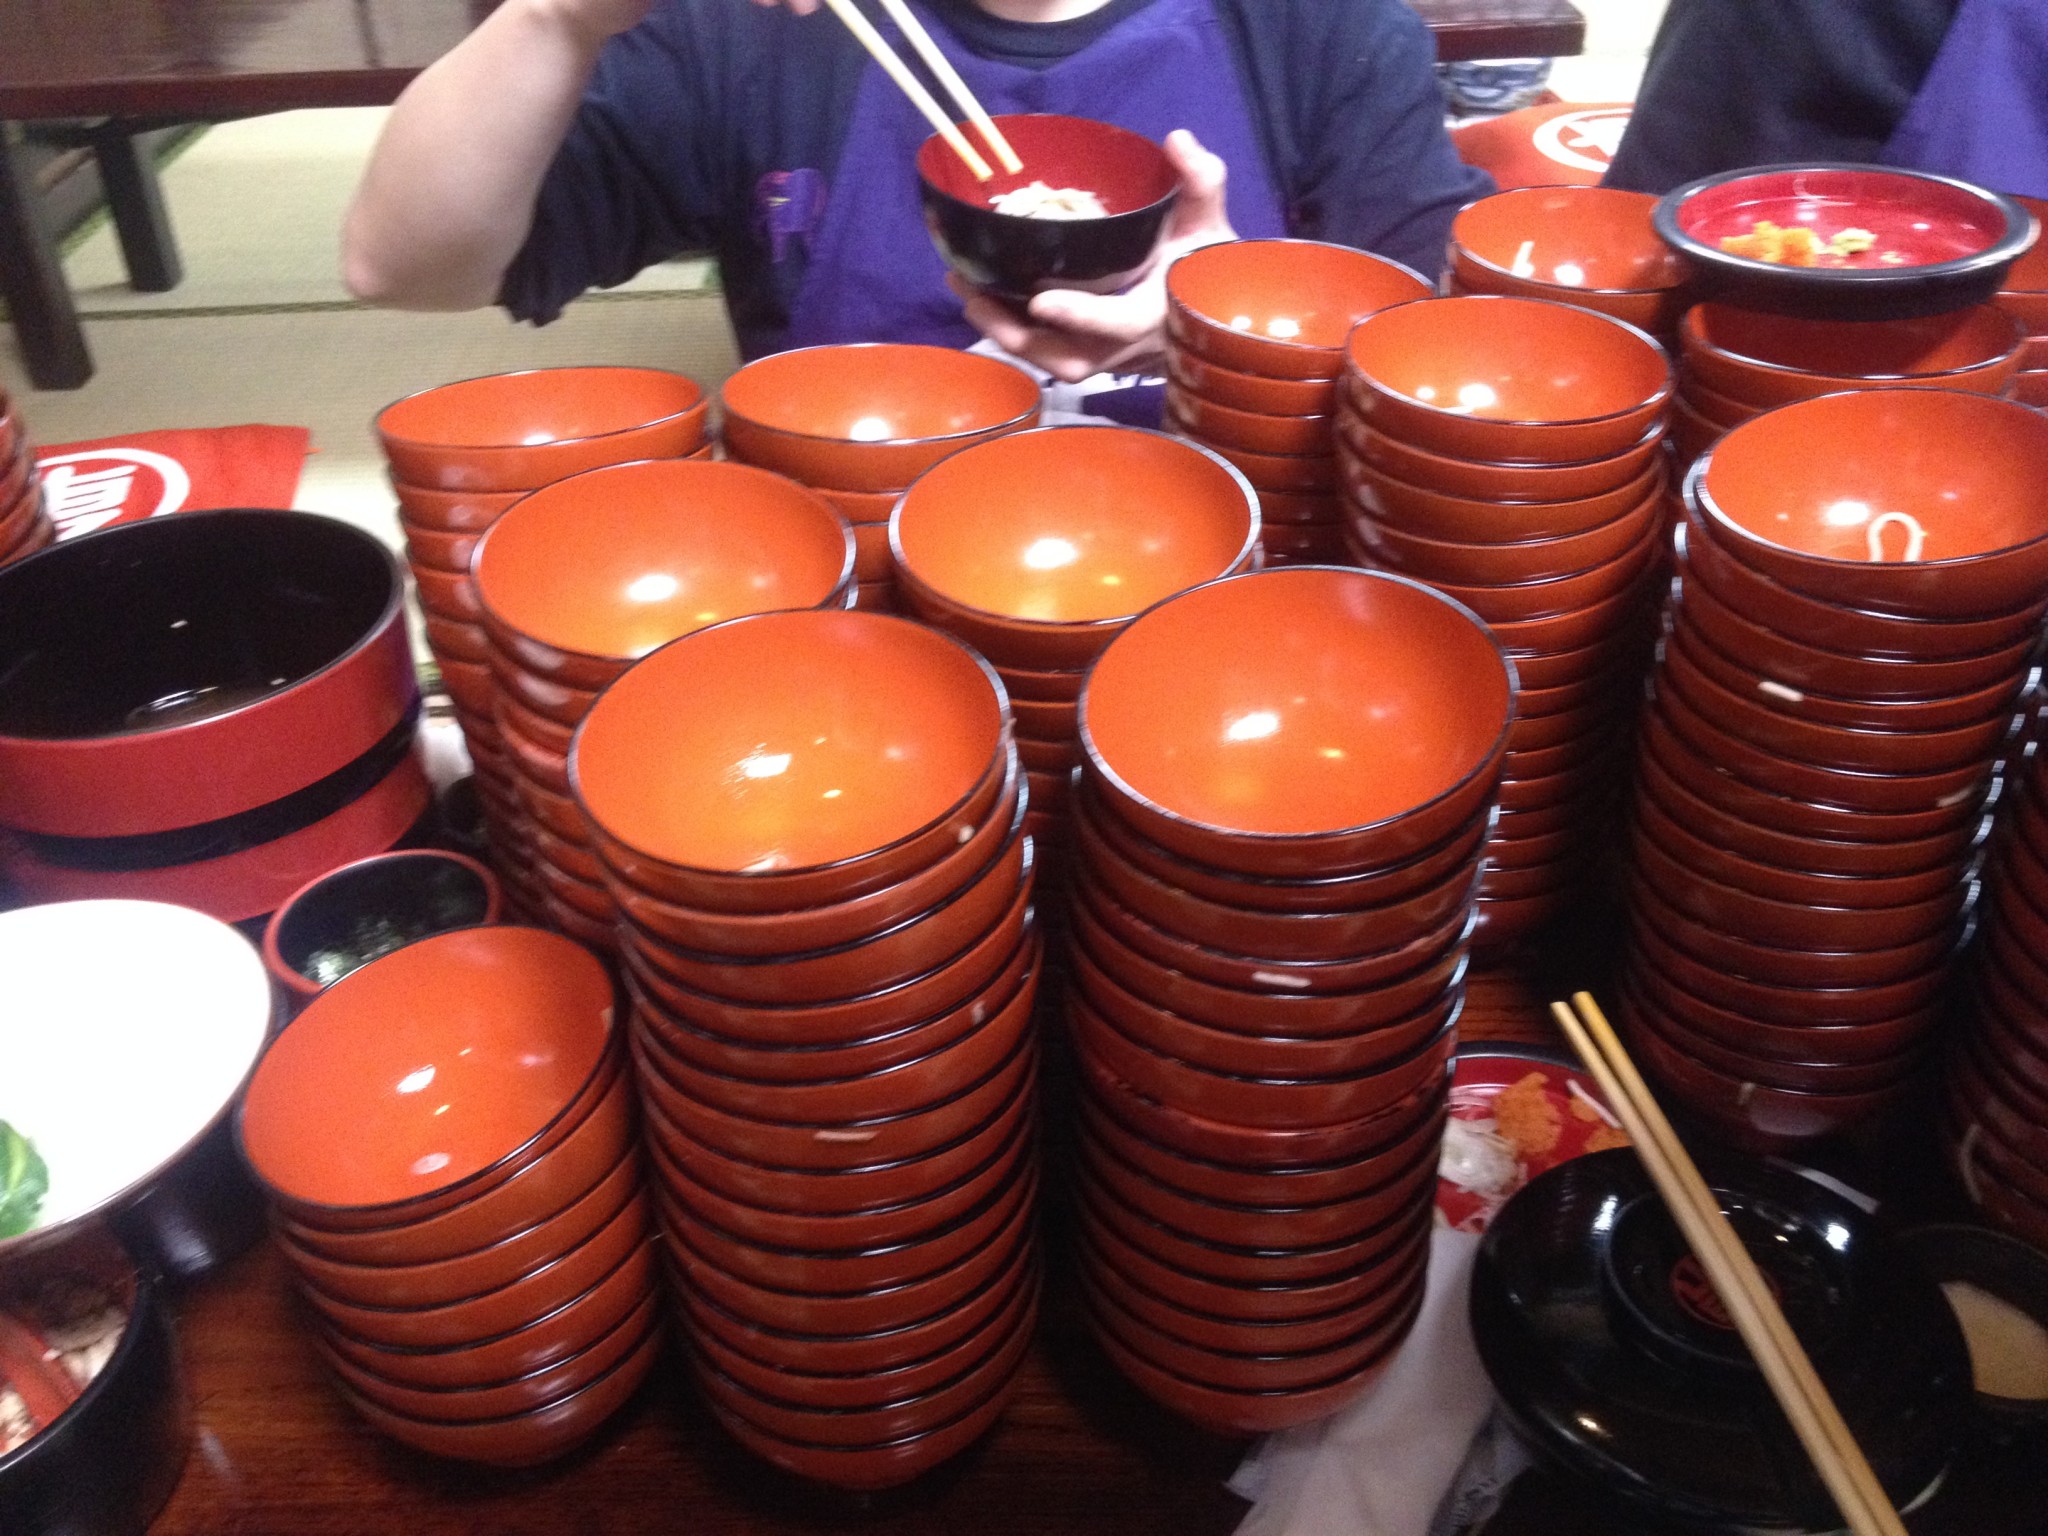 Can you eat 100 bowls of soba?